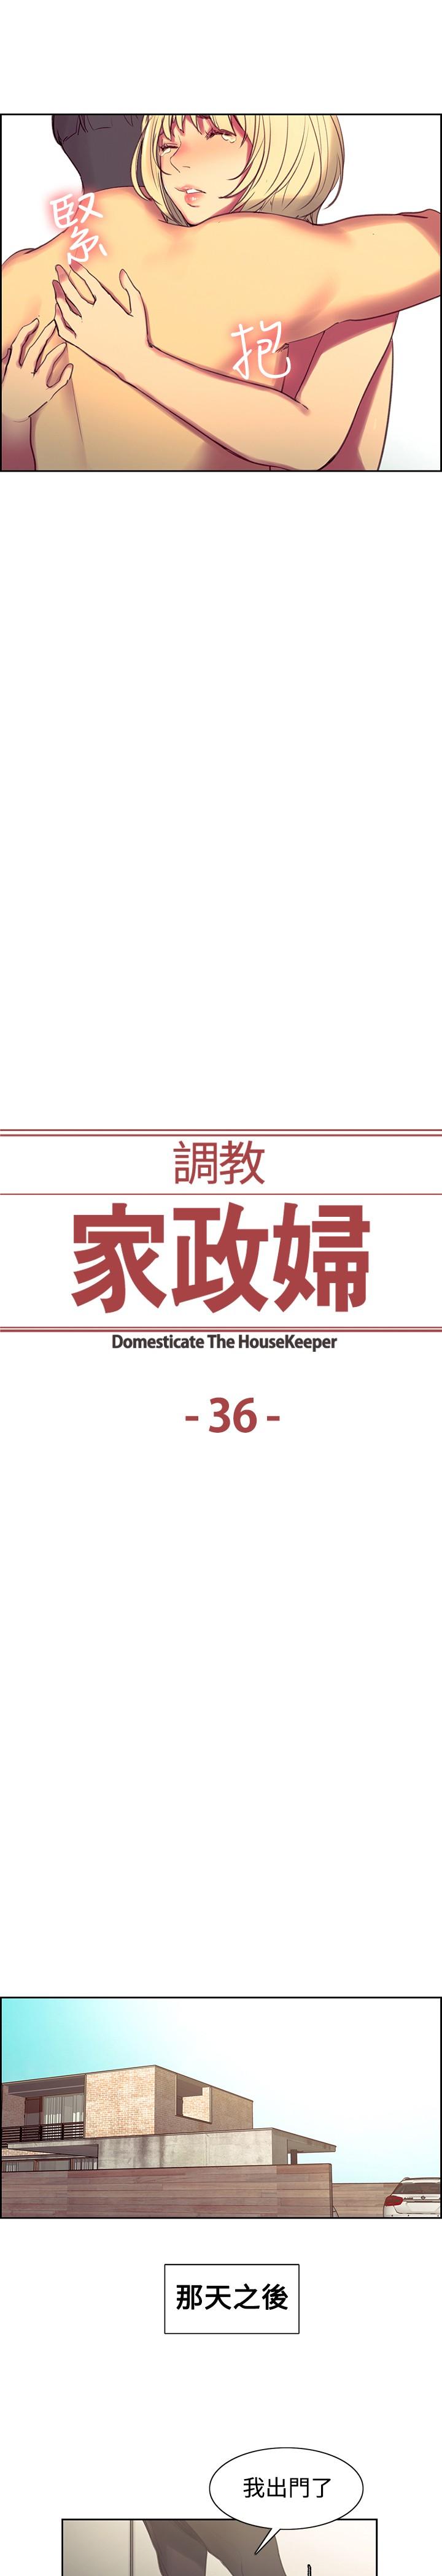 [Serious] Domesticate the Housekeeper 调教家政妇 Ch.29~44END [Chinese]中文 124